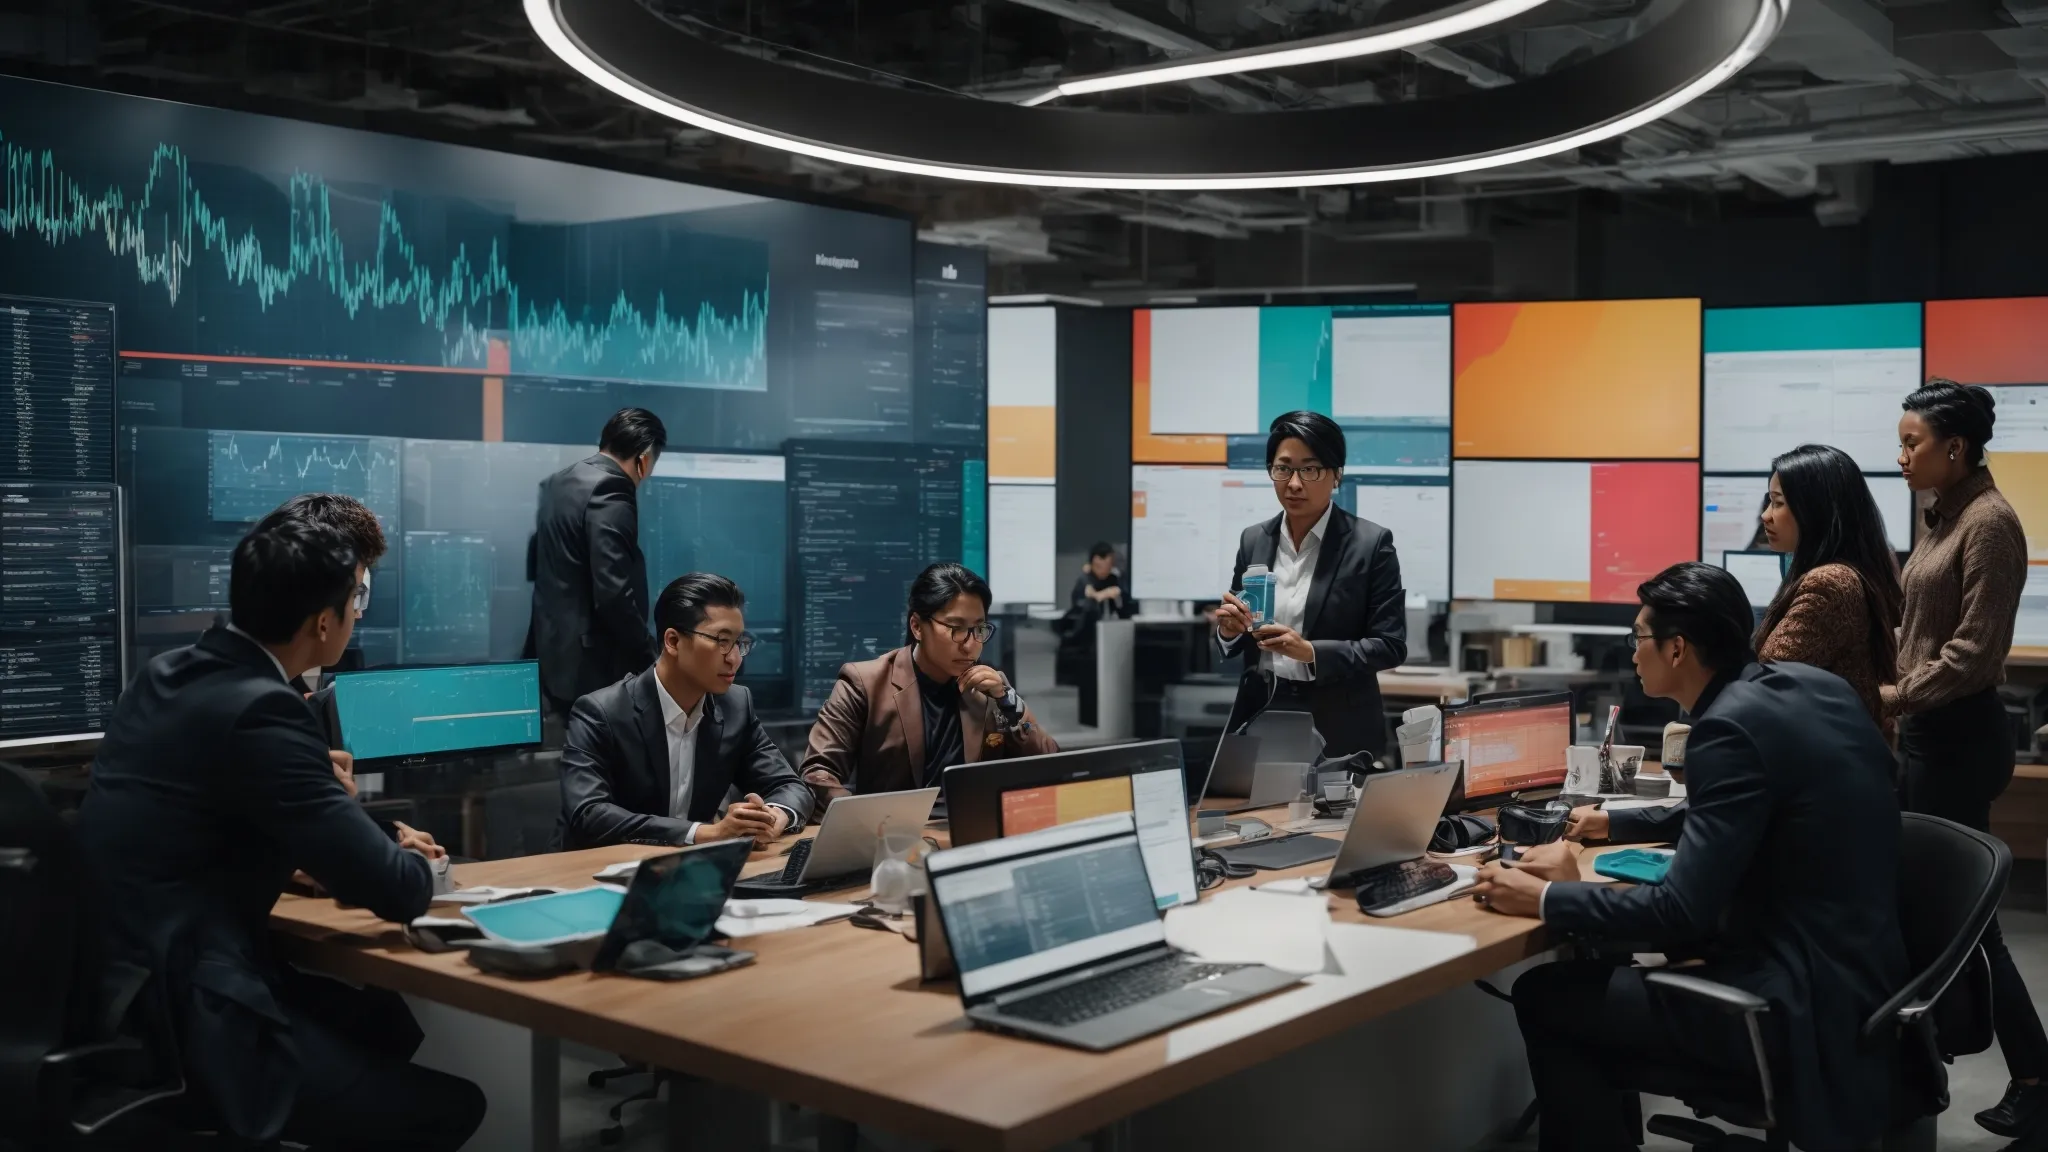 A Strategic Team Huddles Over A Vibrant, Collaborative Workspace Covered In Marketing Materials And Digital Analytics Screens Displaying Graphs And Trends.